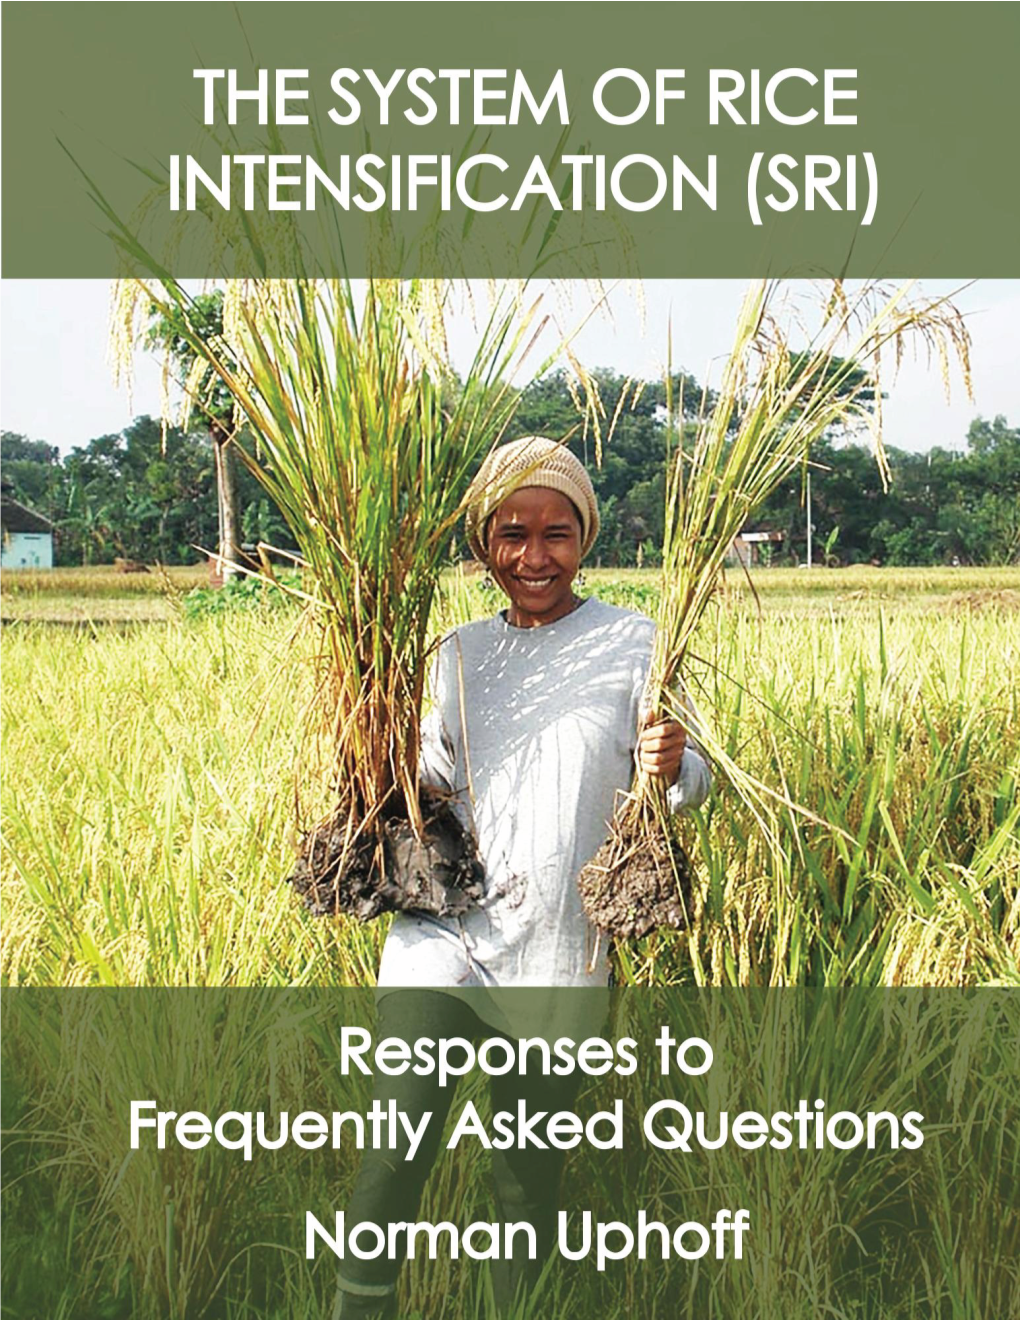 (SRI): Responses to Frequently Asked Questions